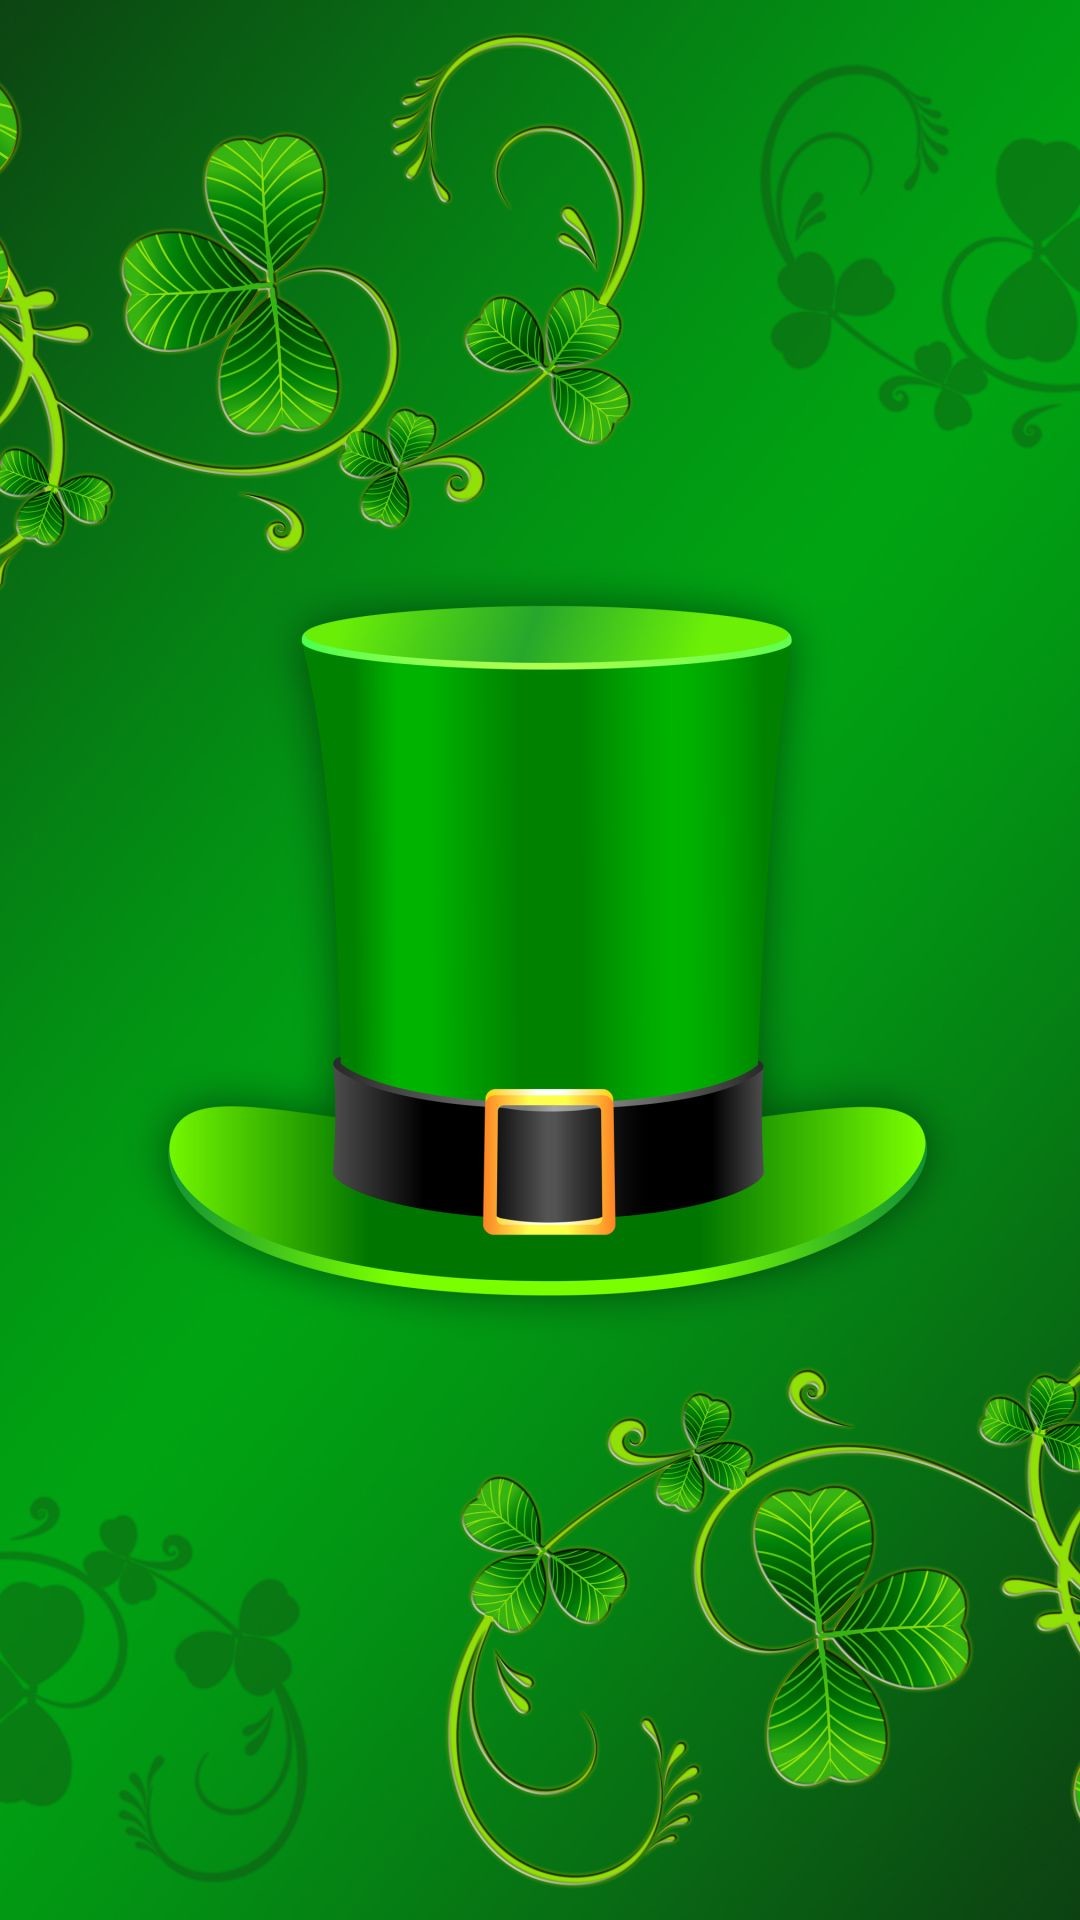 1080x1920 Image result for st. patrick's day wallpaper